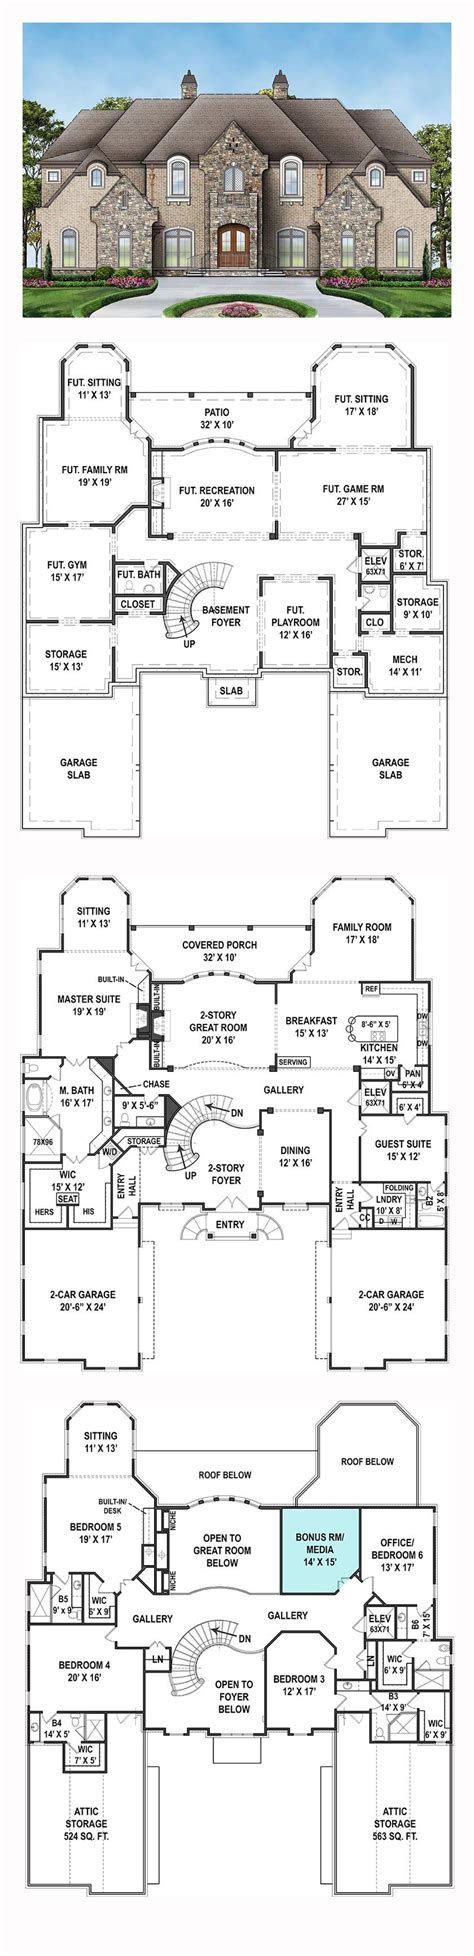 story mansion house plans homeplan cloud bankhomecom